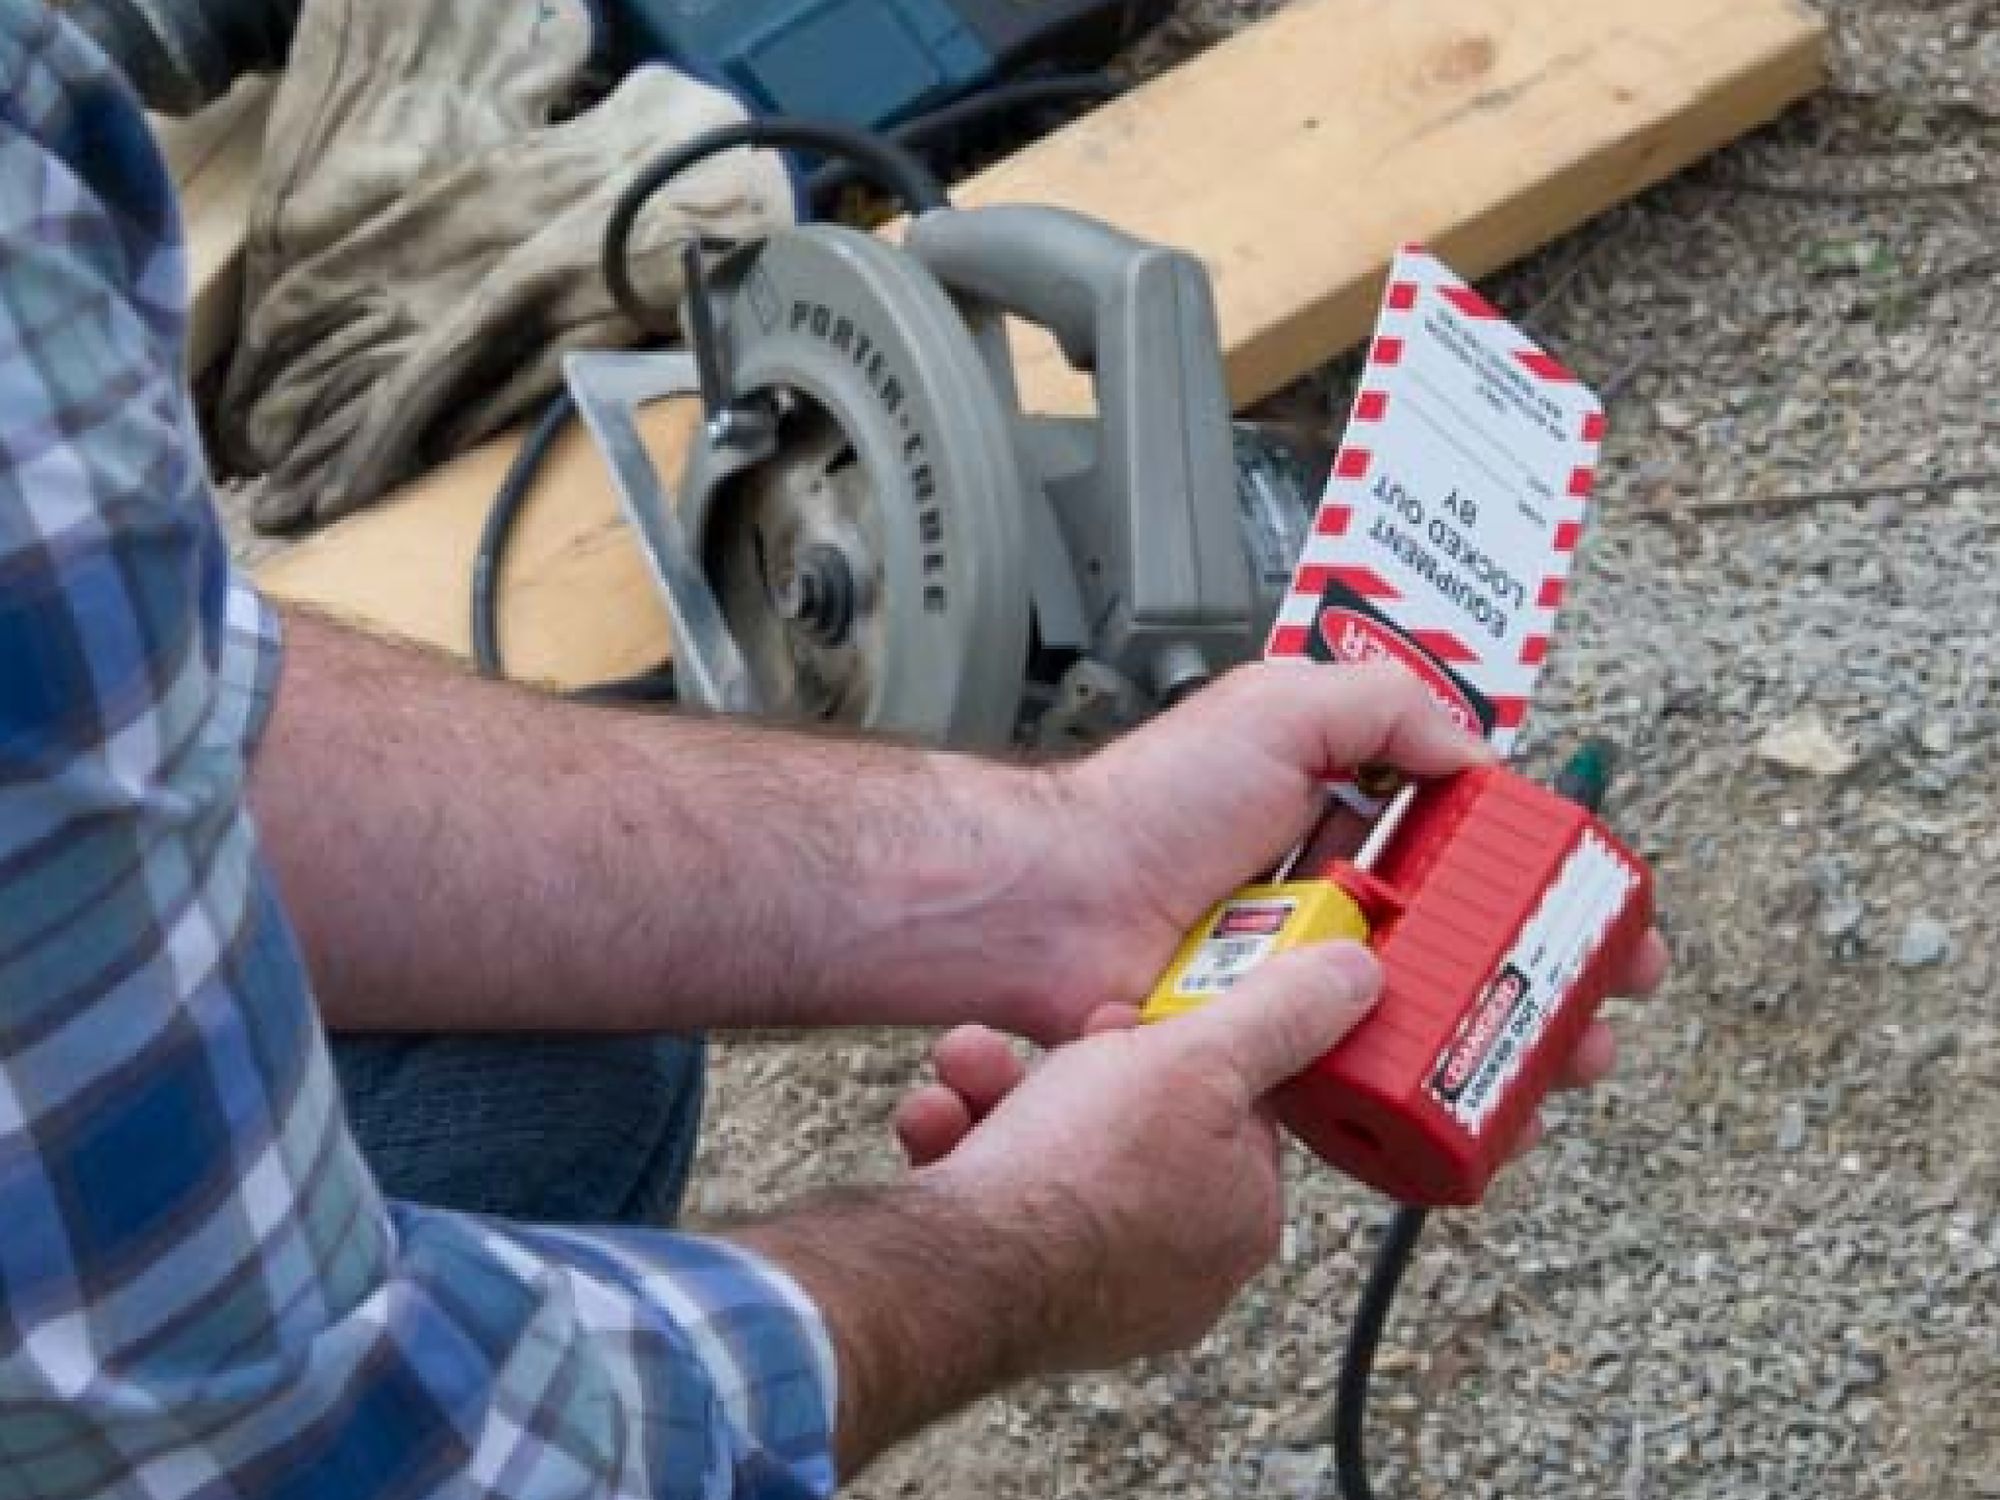 Removal of lockout/tagout devices